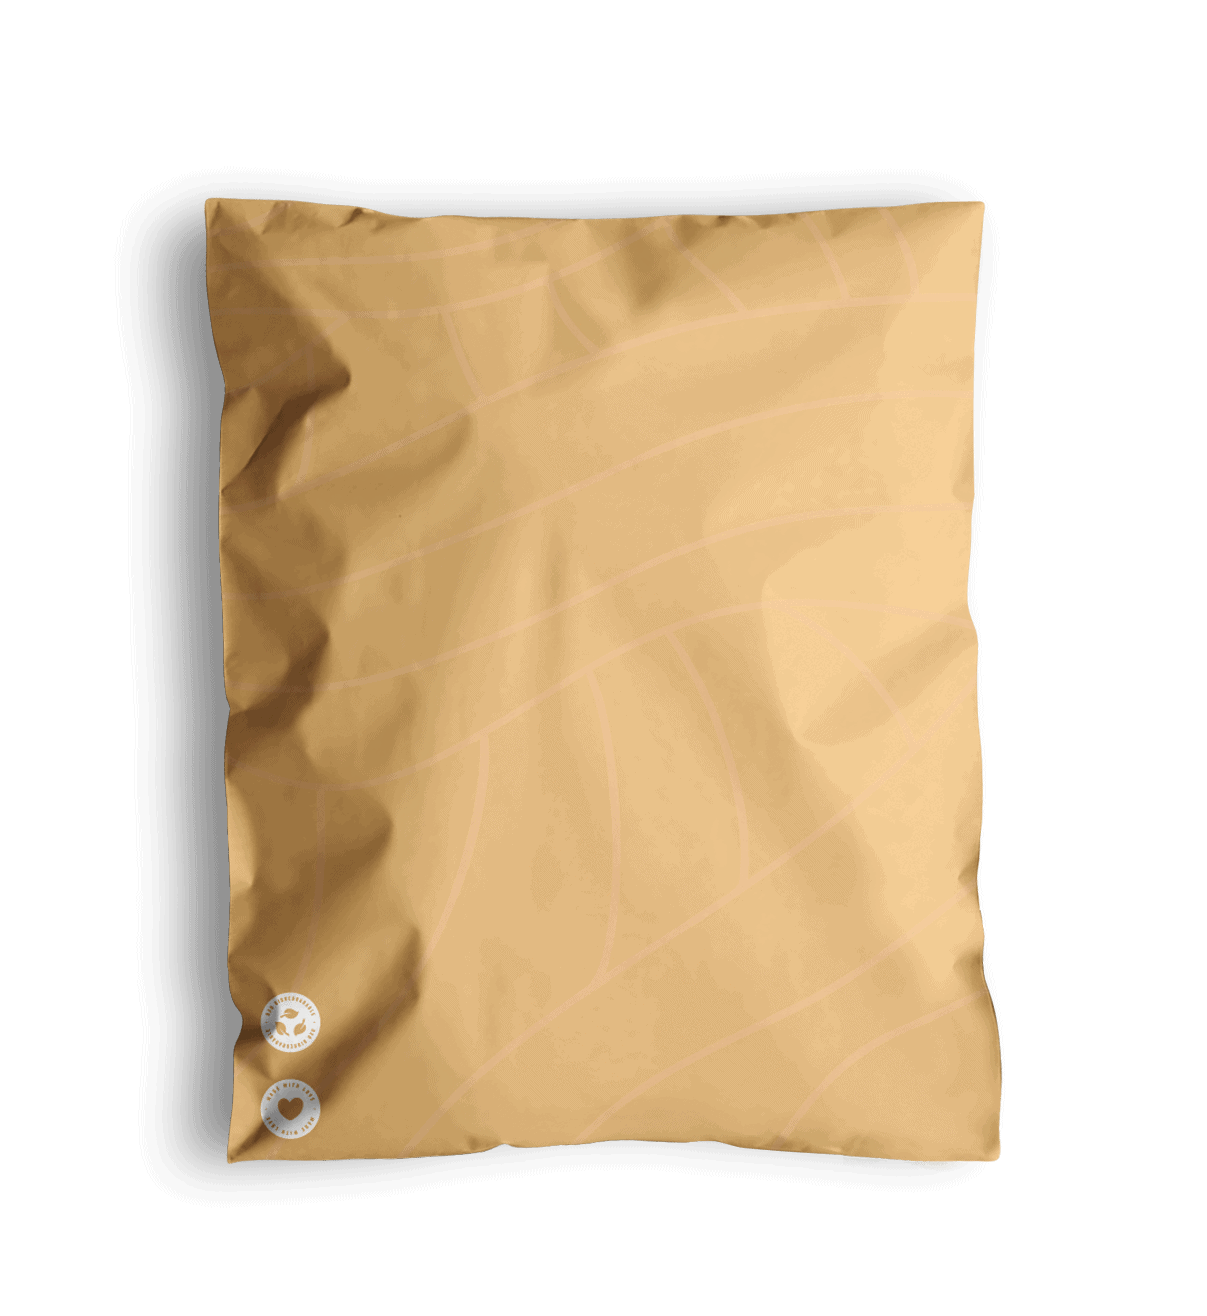 A Mustard Leaf Biodegradable Mailer 14.5" x 19" from impack.co on a white background.